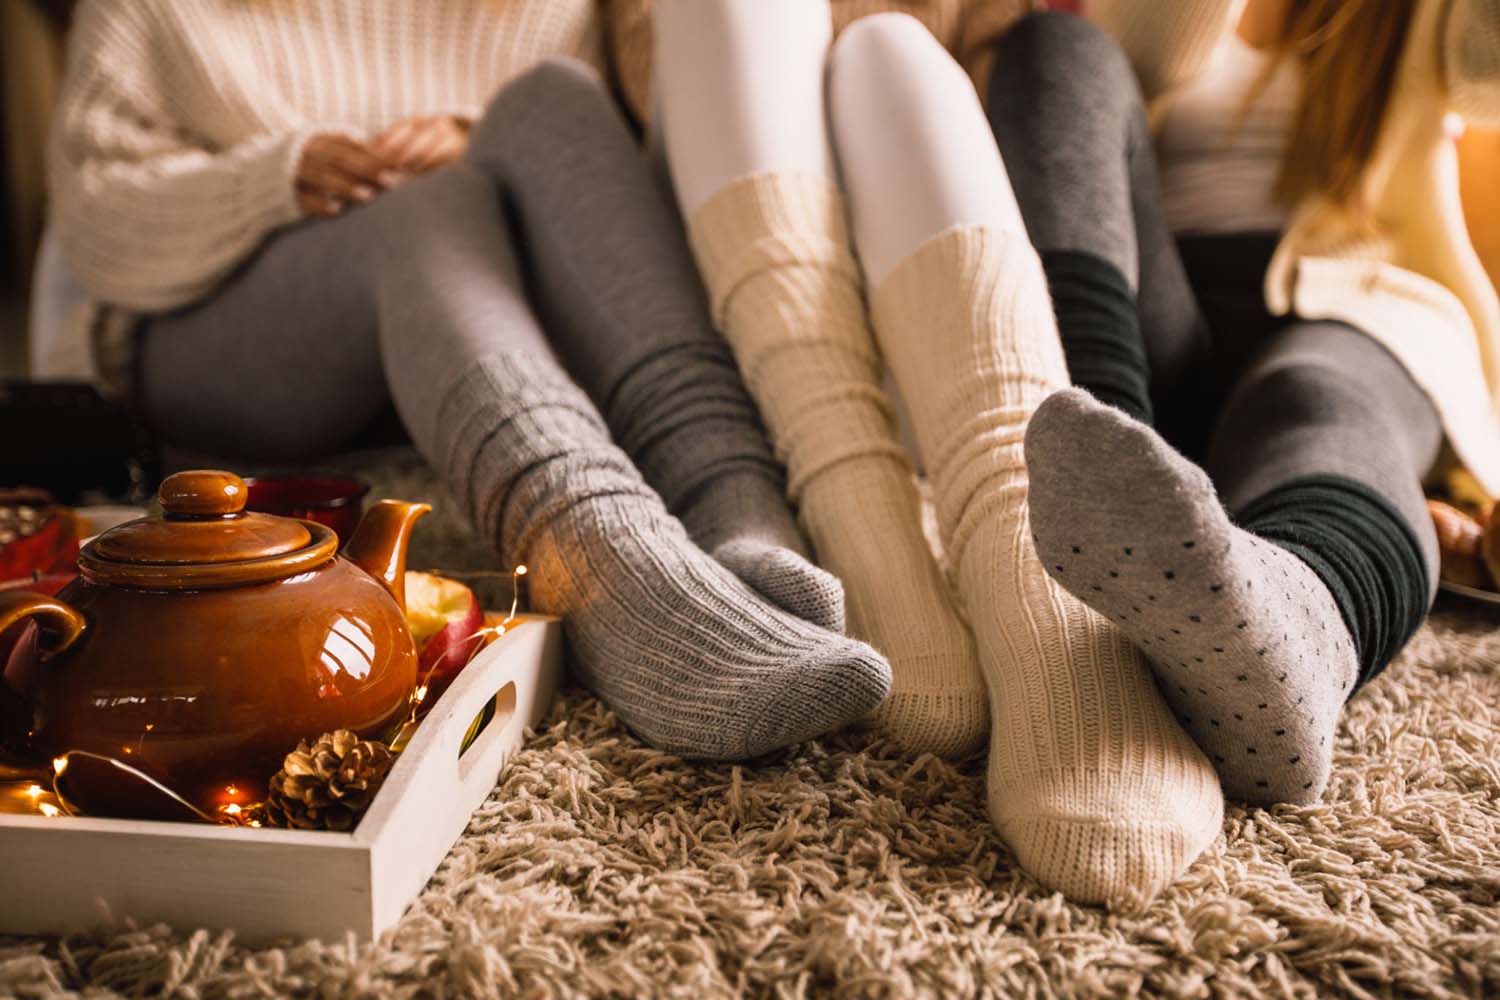 How to Keep House Warm in Winter, Practical Ideas to Stay Cosy During the Cold Weather